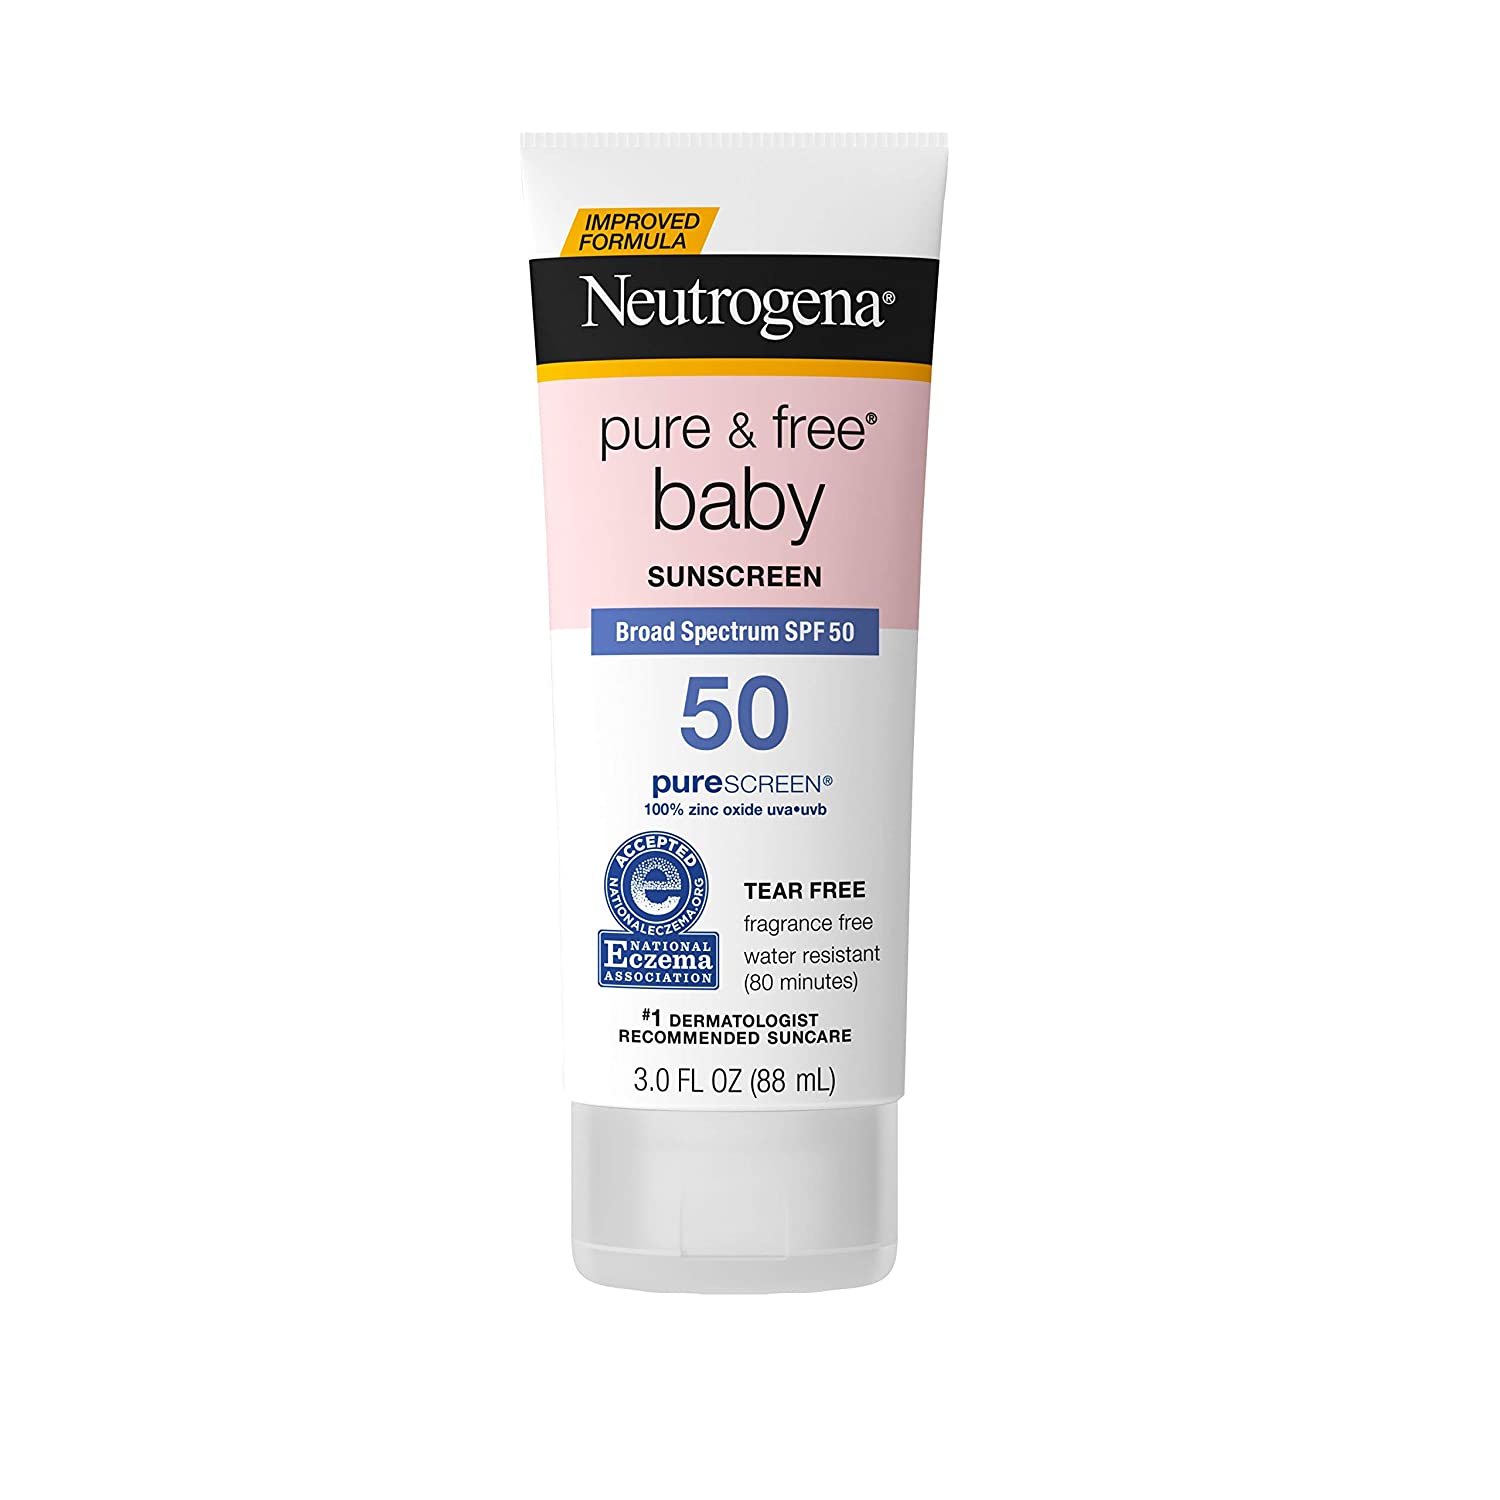 Neutrogena Pure & Free Baby Mineral Sunscreen Lotion with Broad Spectrum SPF 50 & Zinc Oxide, Water-Resistant, Hypoallergenic & Tear-Free Baby Sunscreen, 3 fl. oz